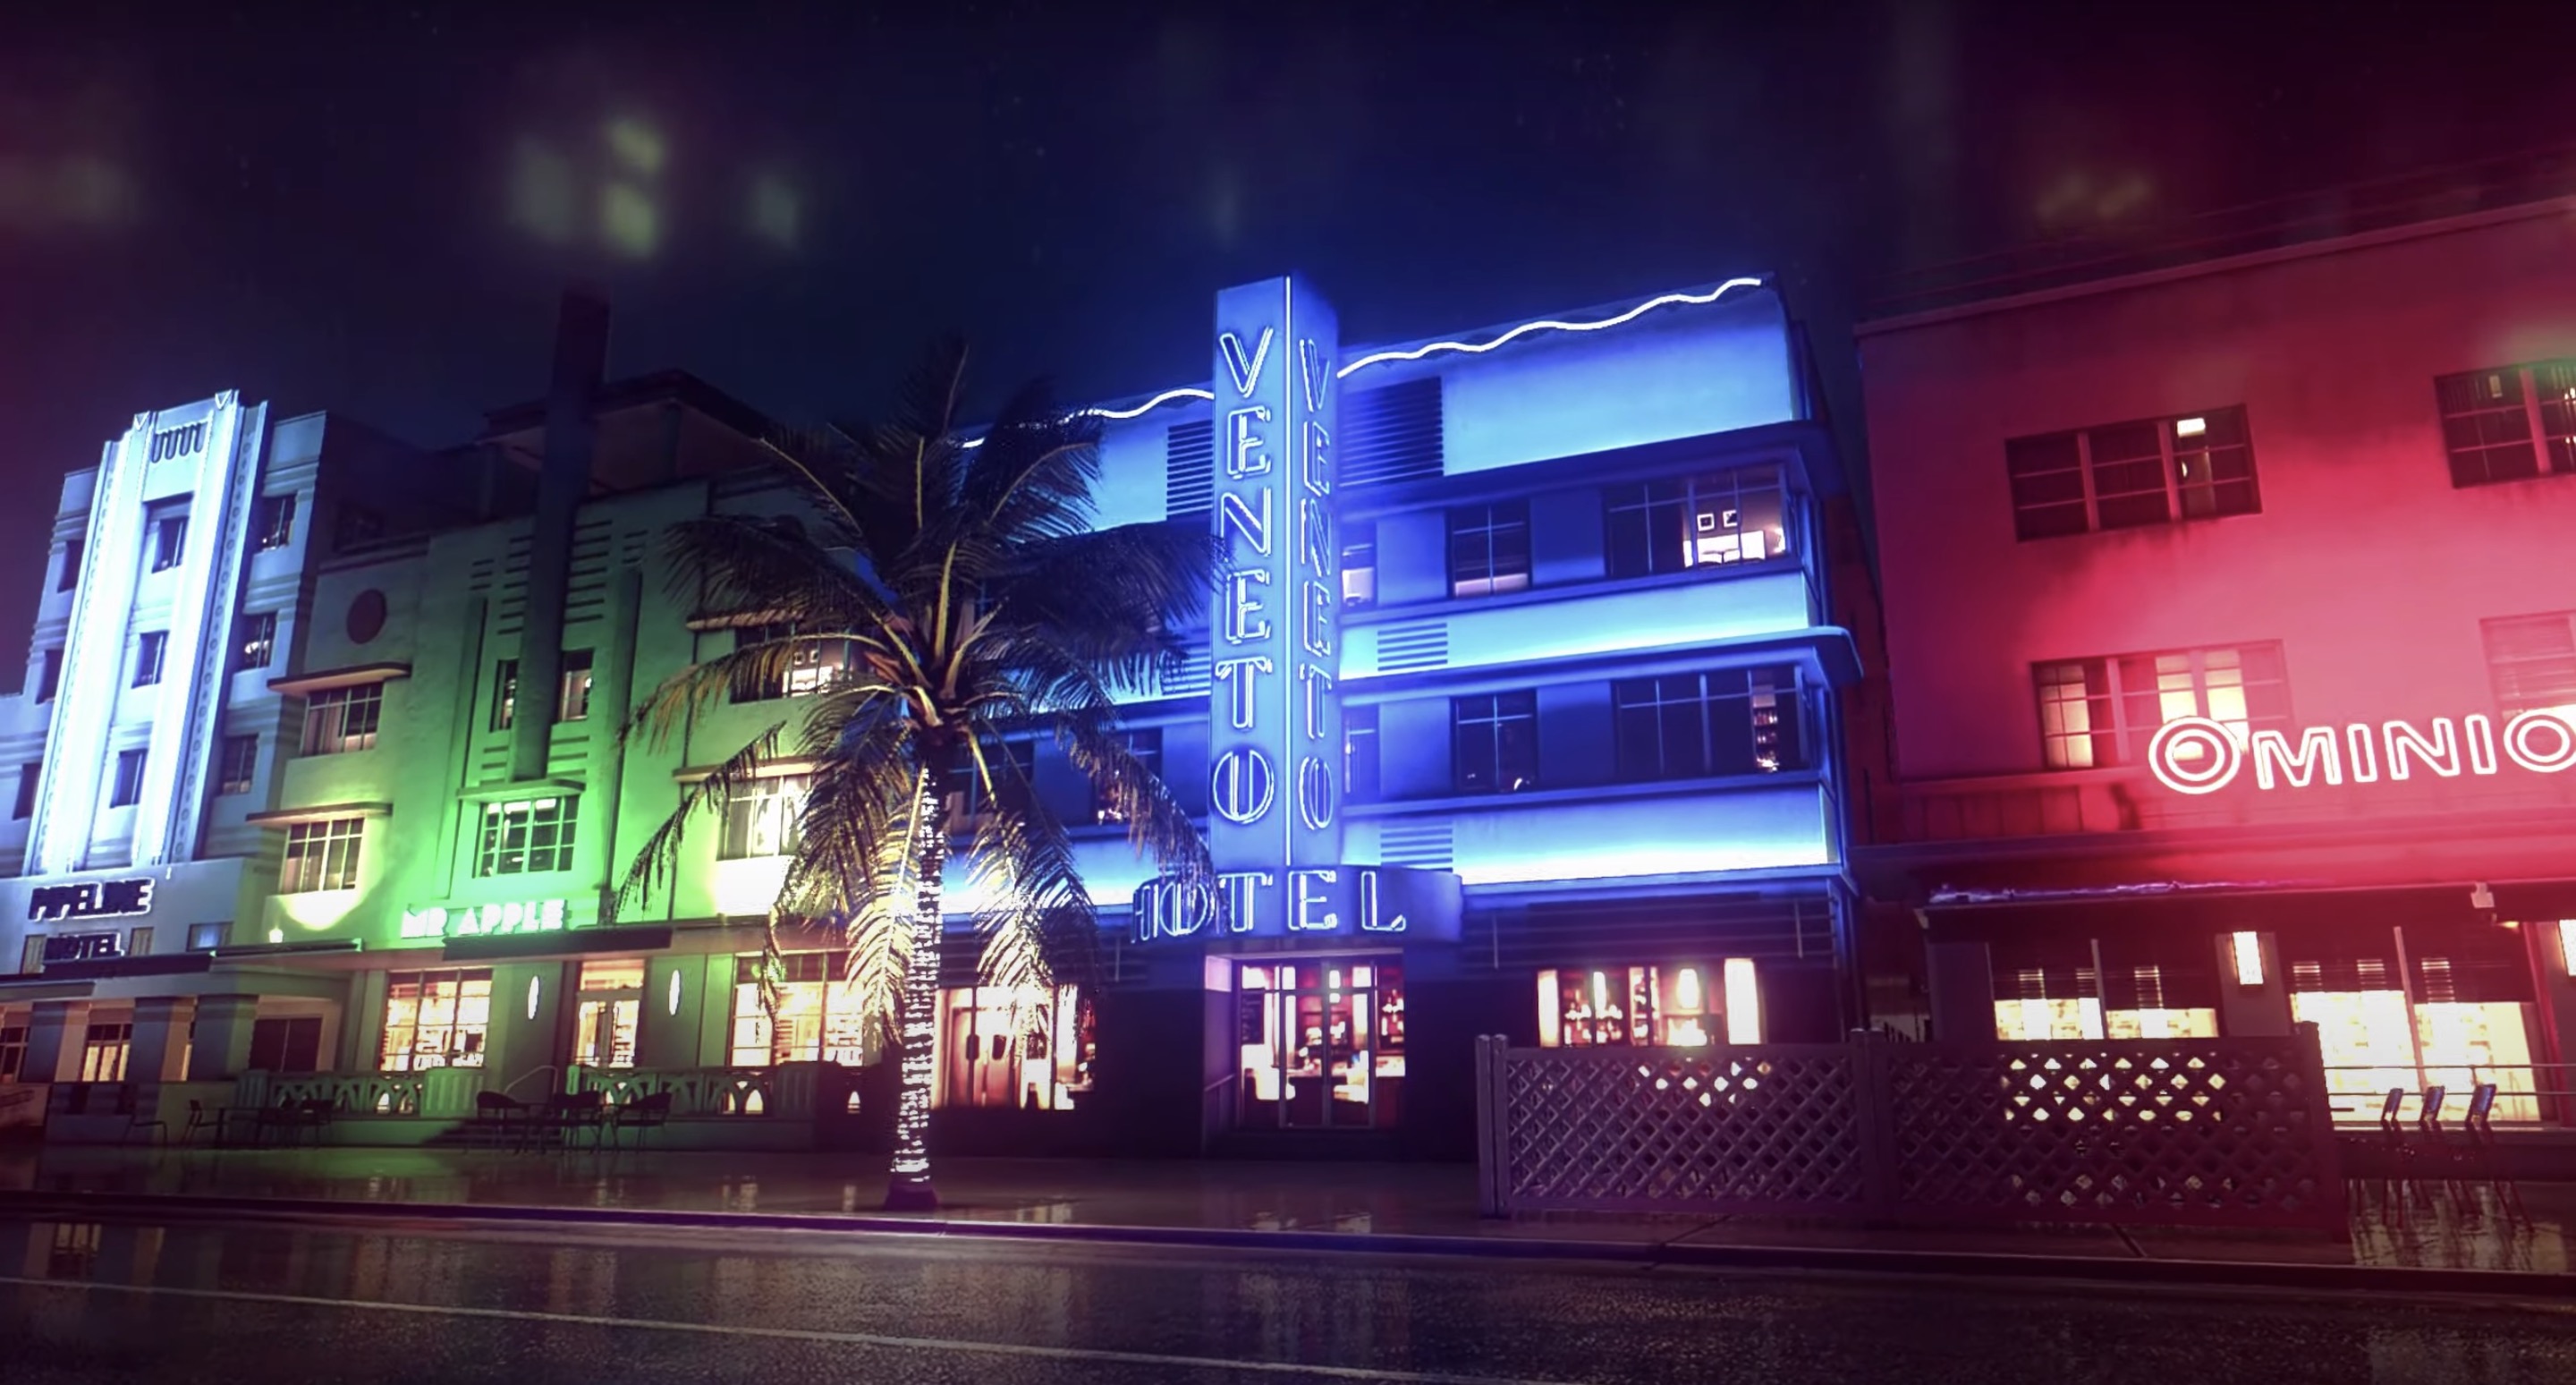 GTA Vice City Reimagined in Unreal Engine 5